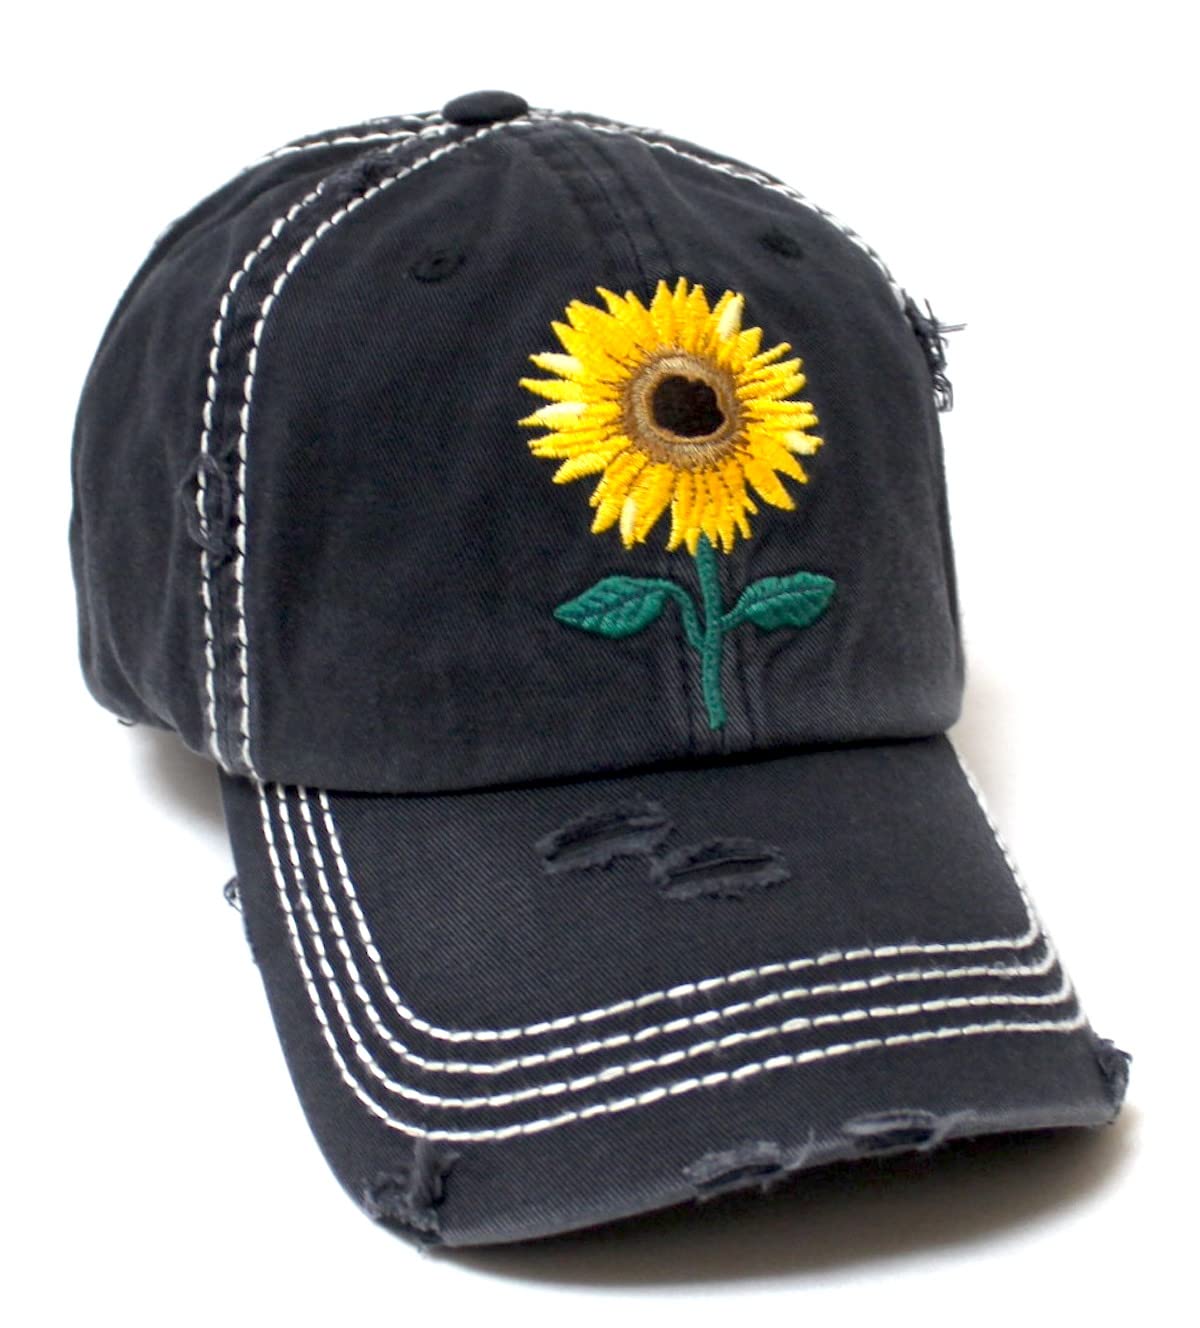 CAPS 'N VINTAGE Women's Sunflower Monogram Cap Patch Embroidery Distressed Hat